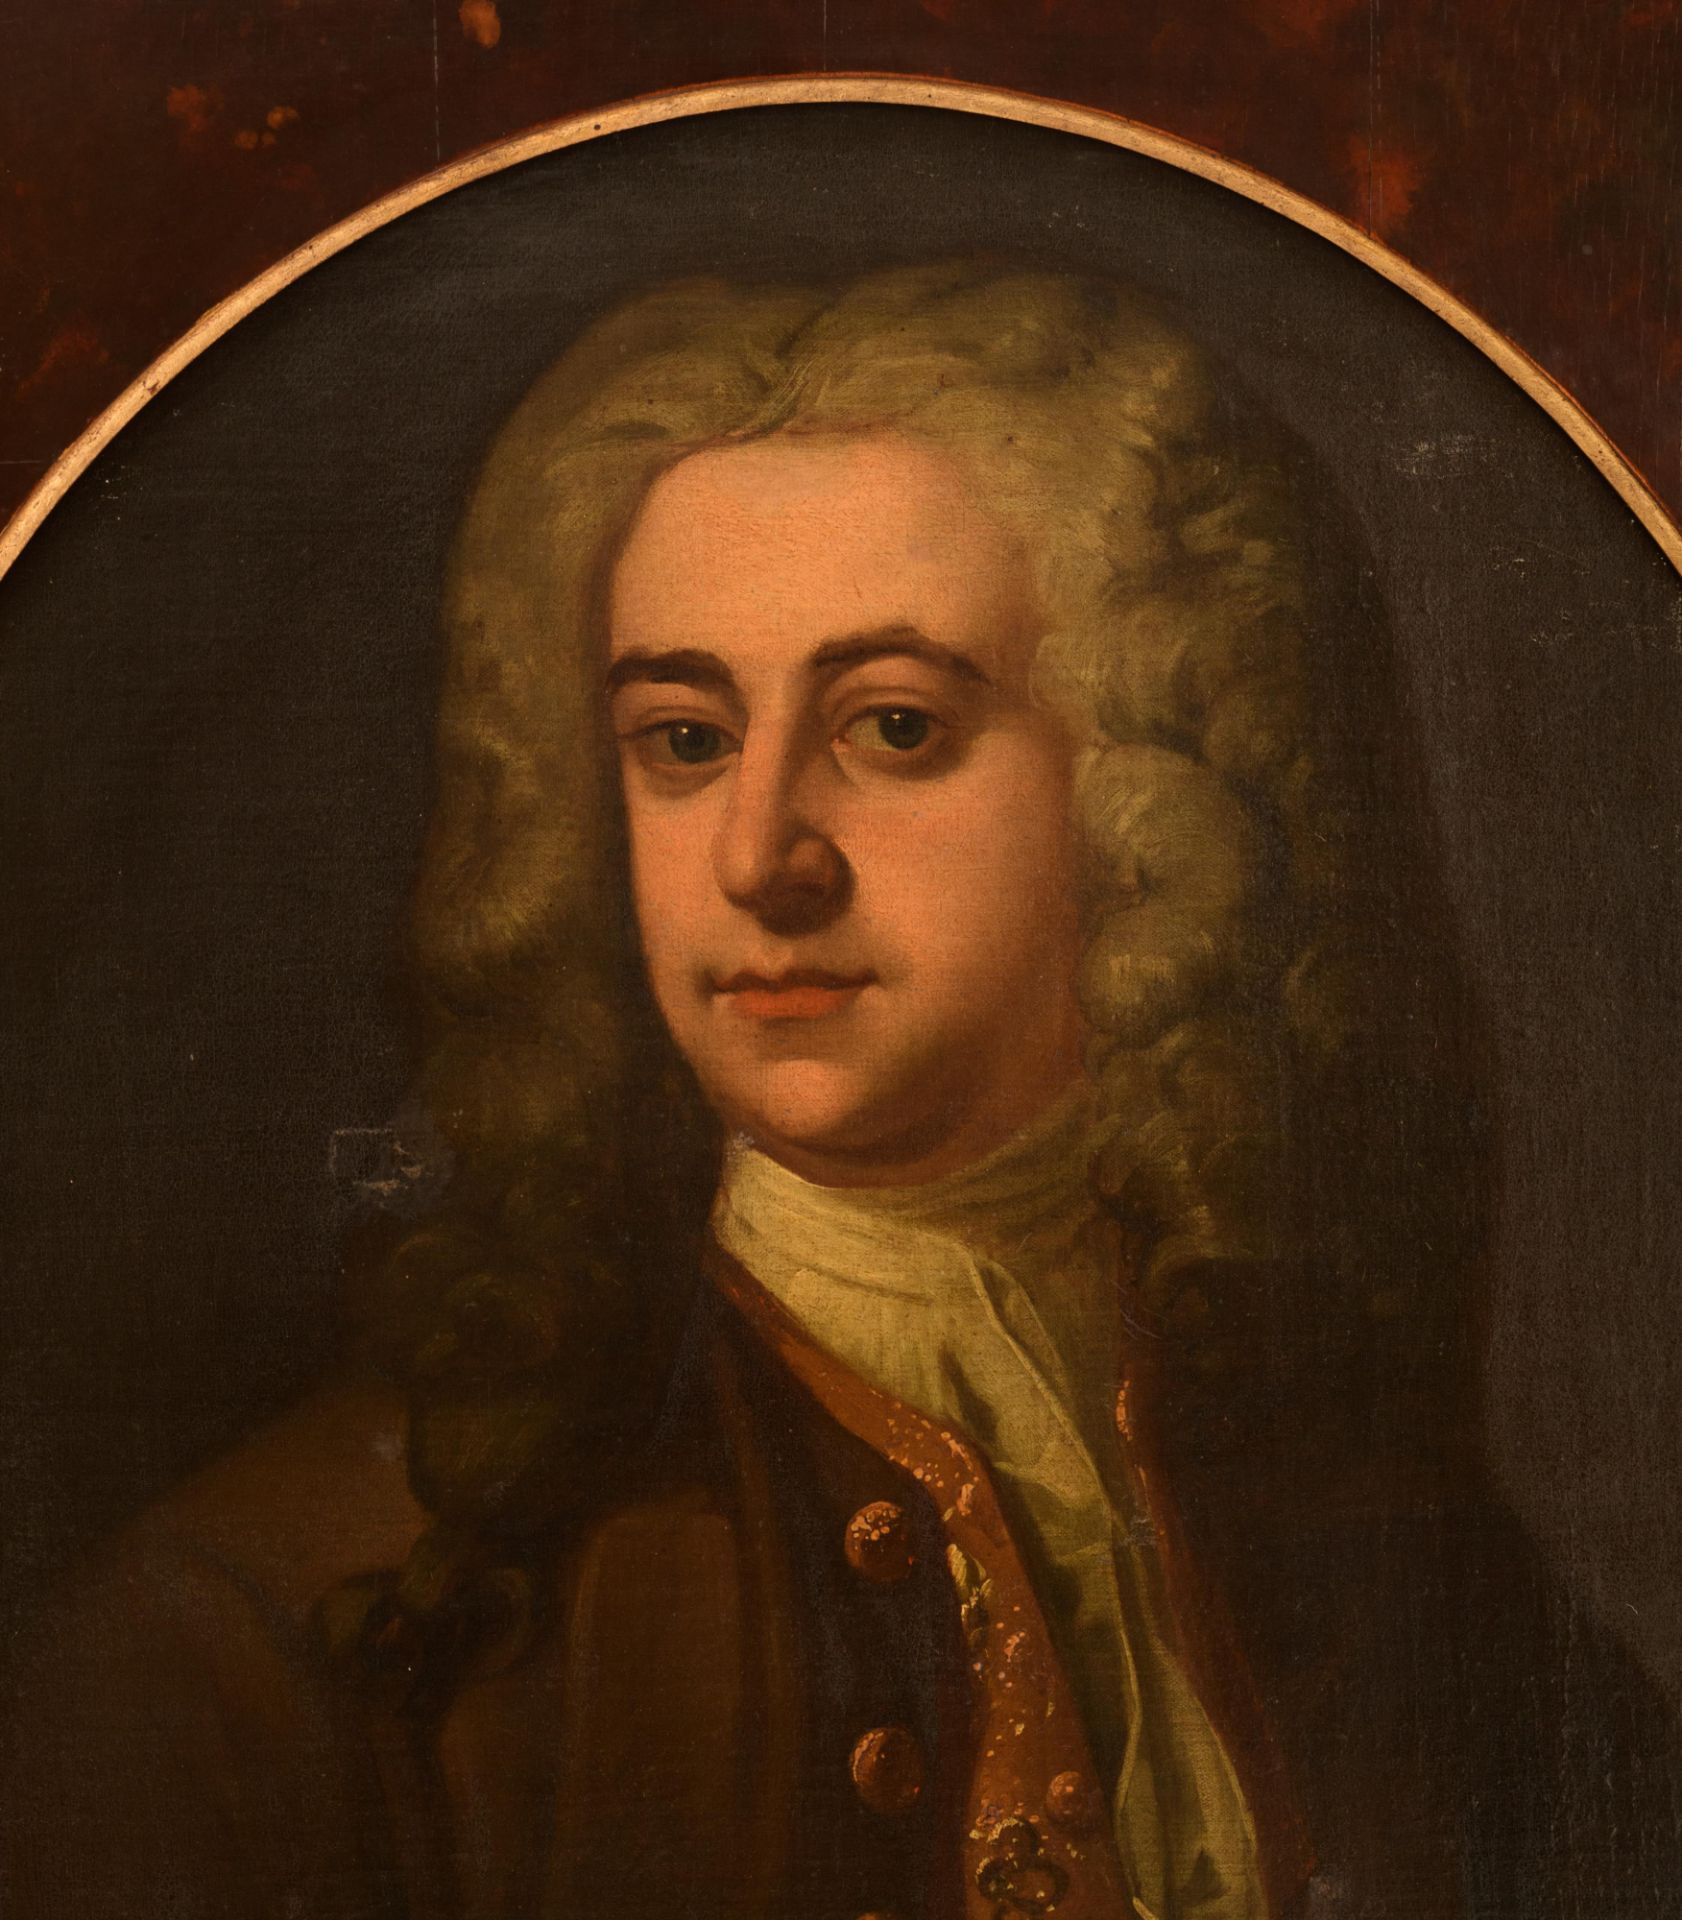 Circle of Joseph Highmore, the portrait of a nobleman, 18thC, 62 x 75 cm - Image 4 of 7